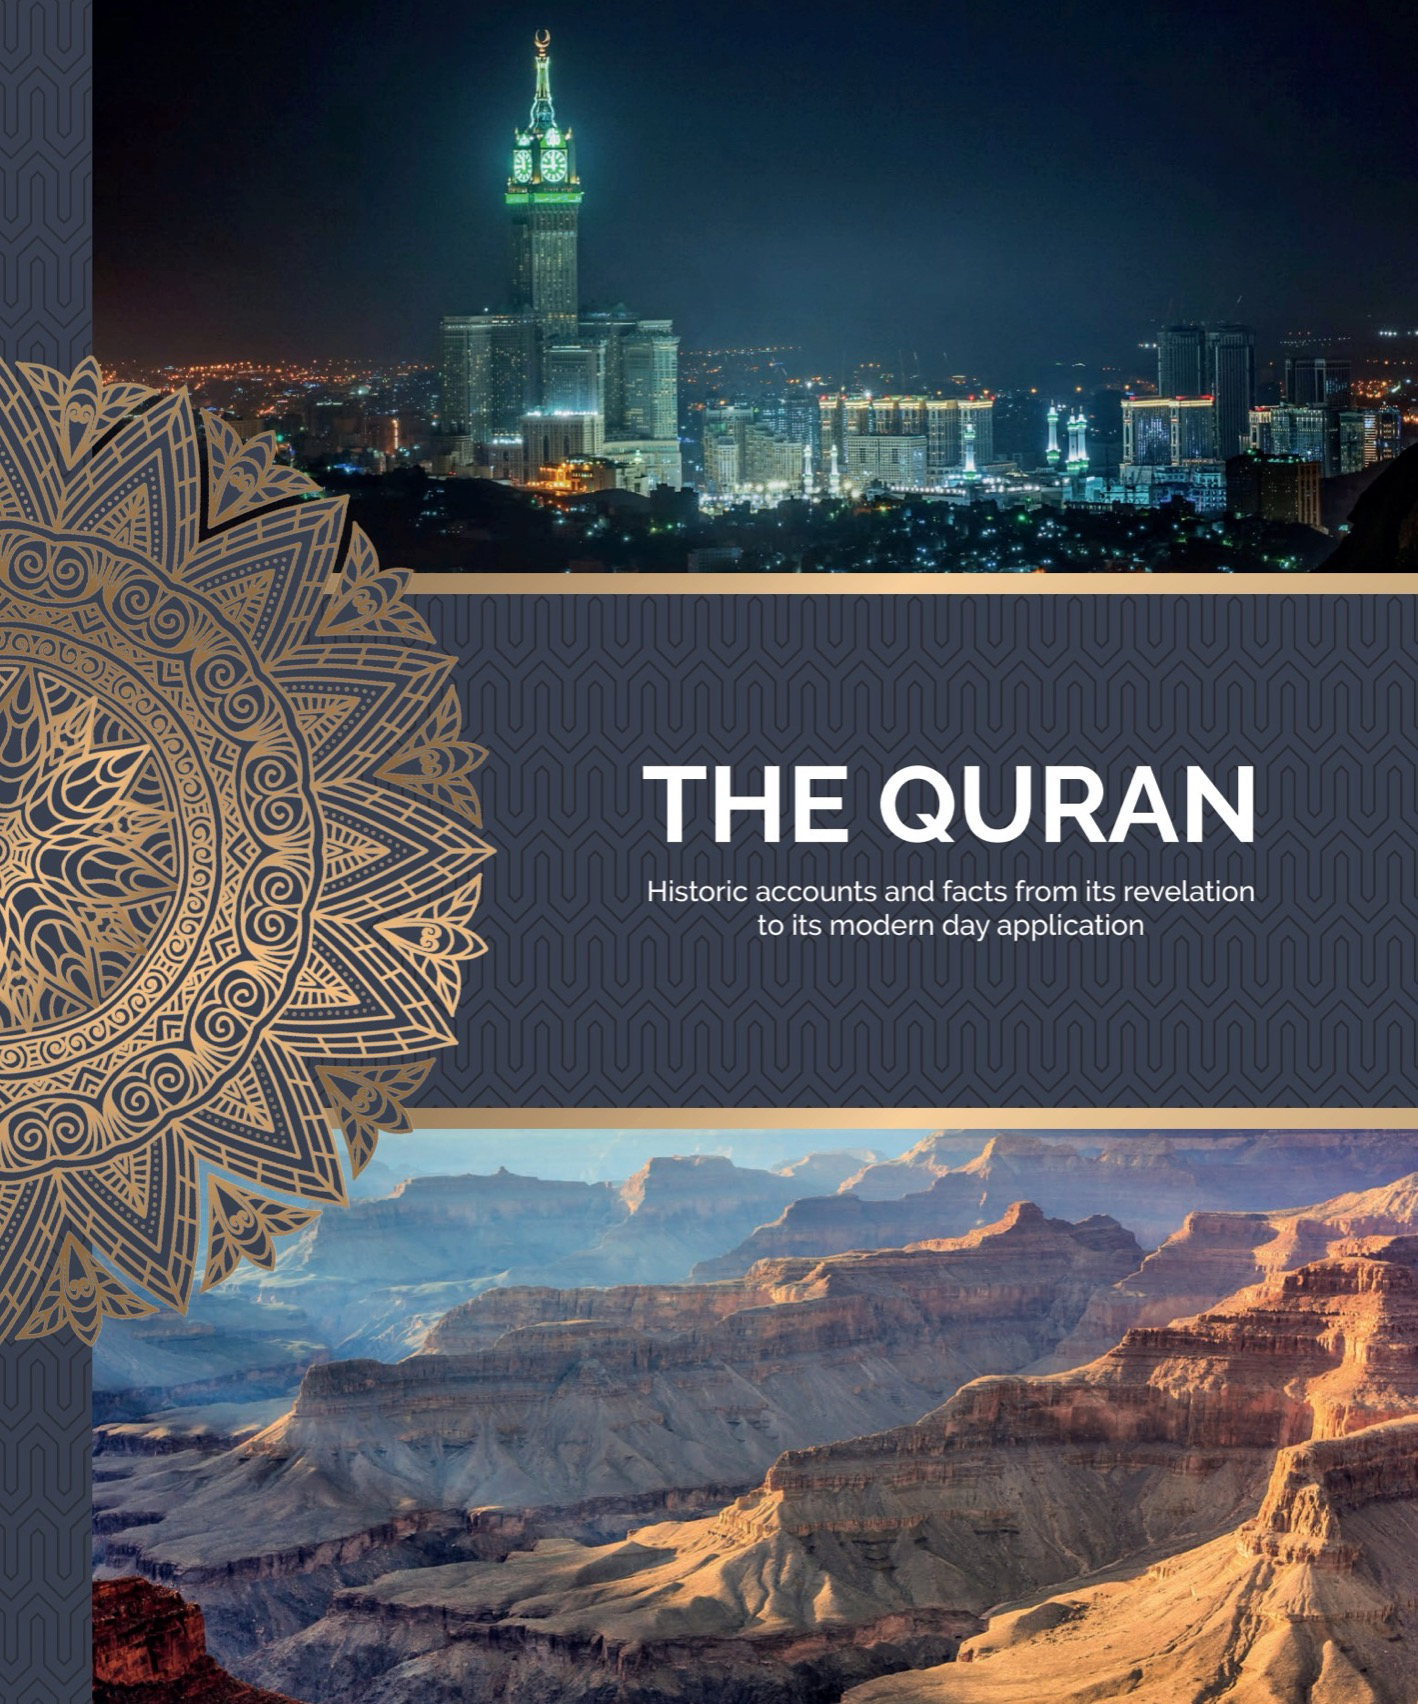 THE QURAN: Historic accounts and facts from its revelation to its modern day application